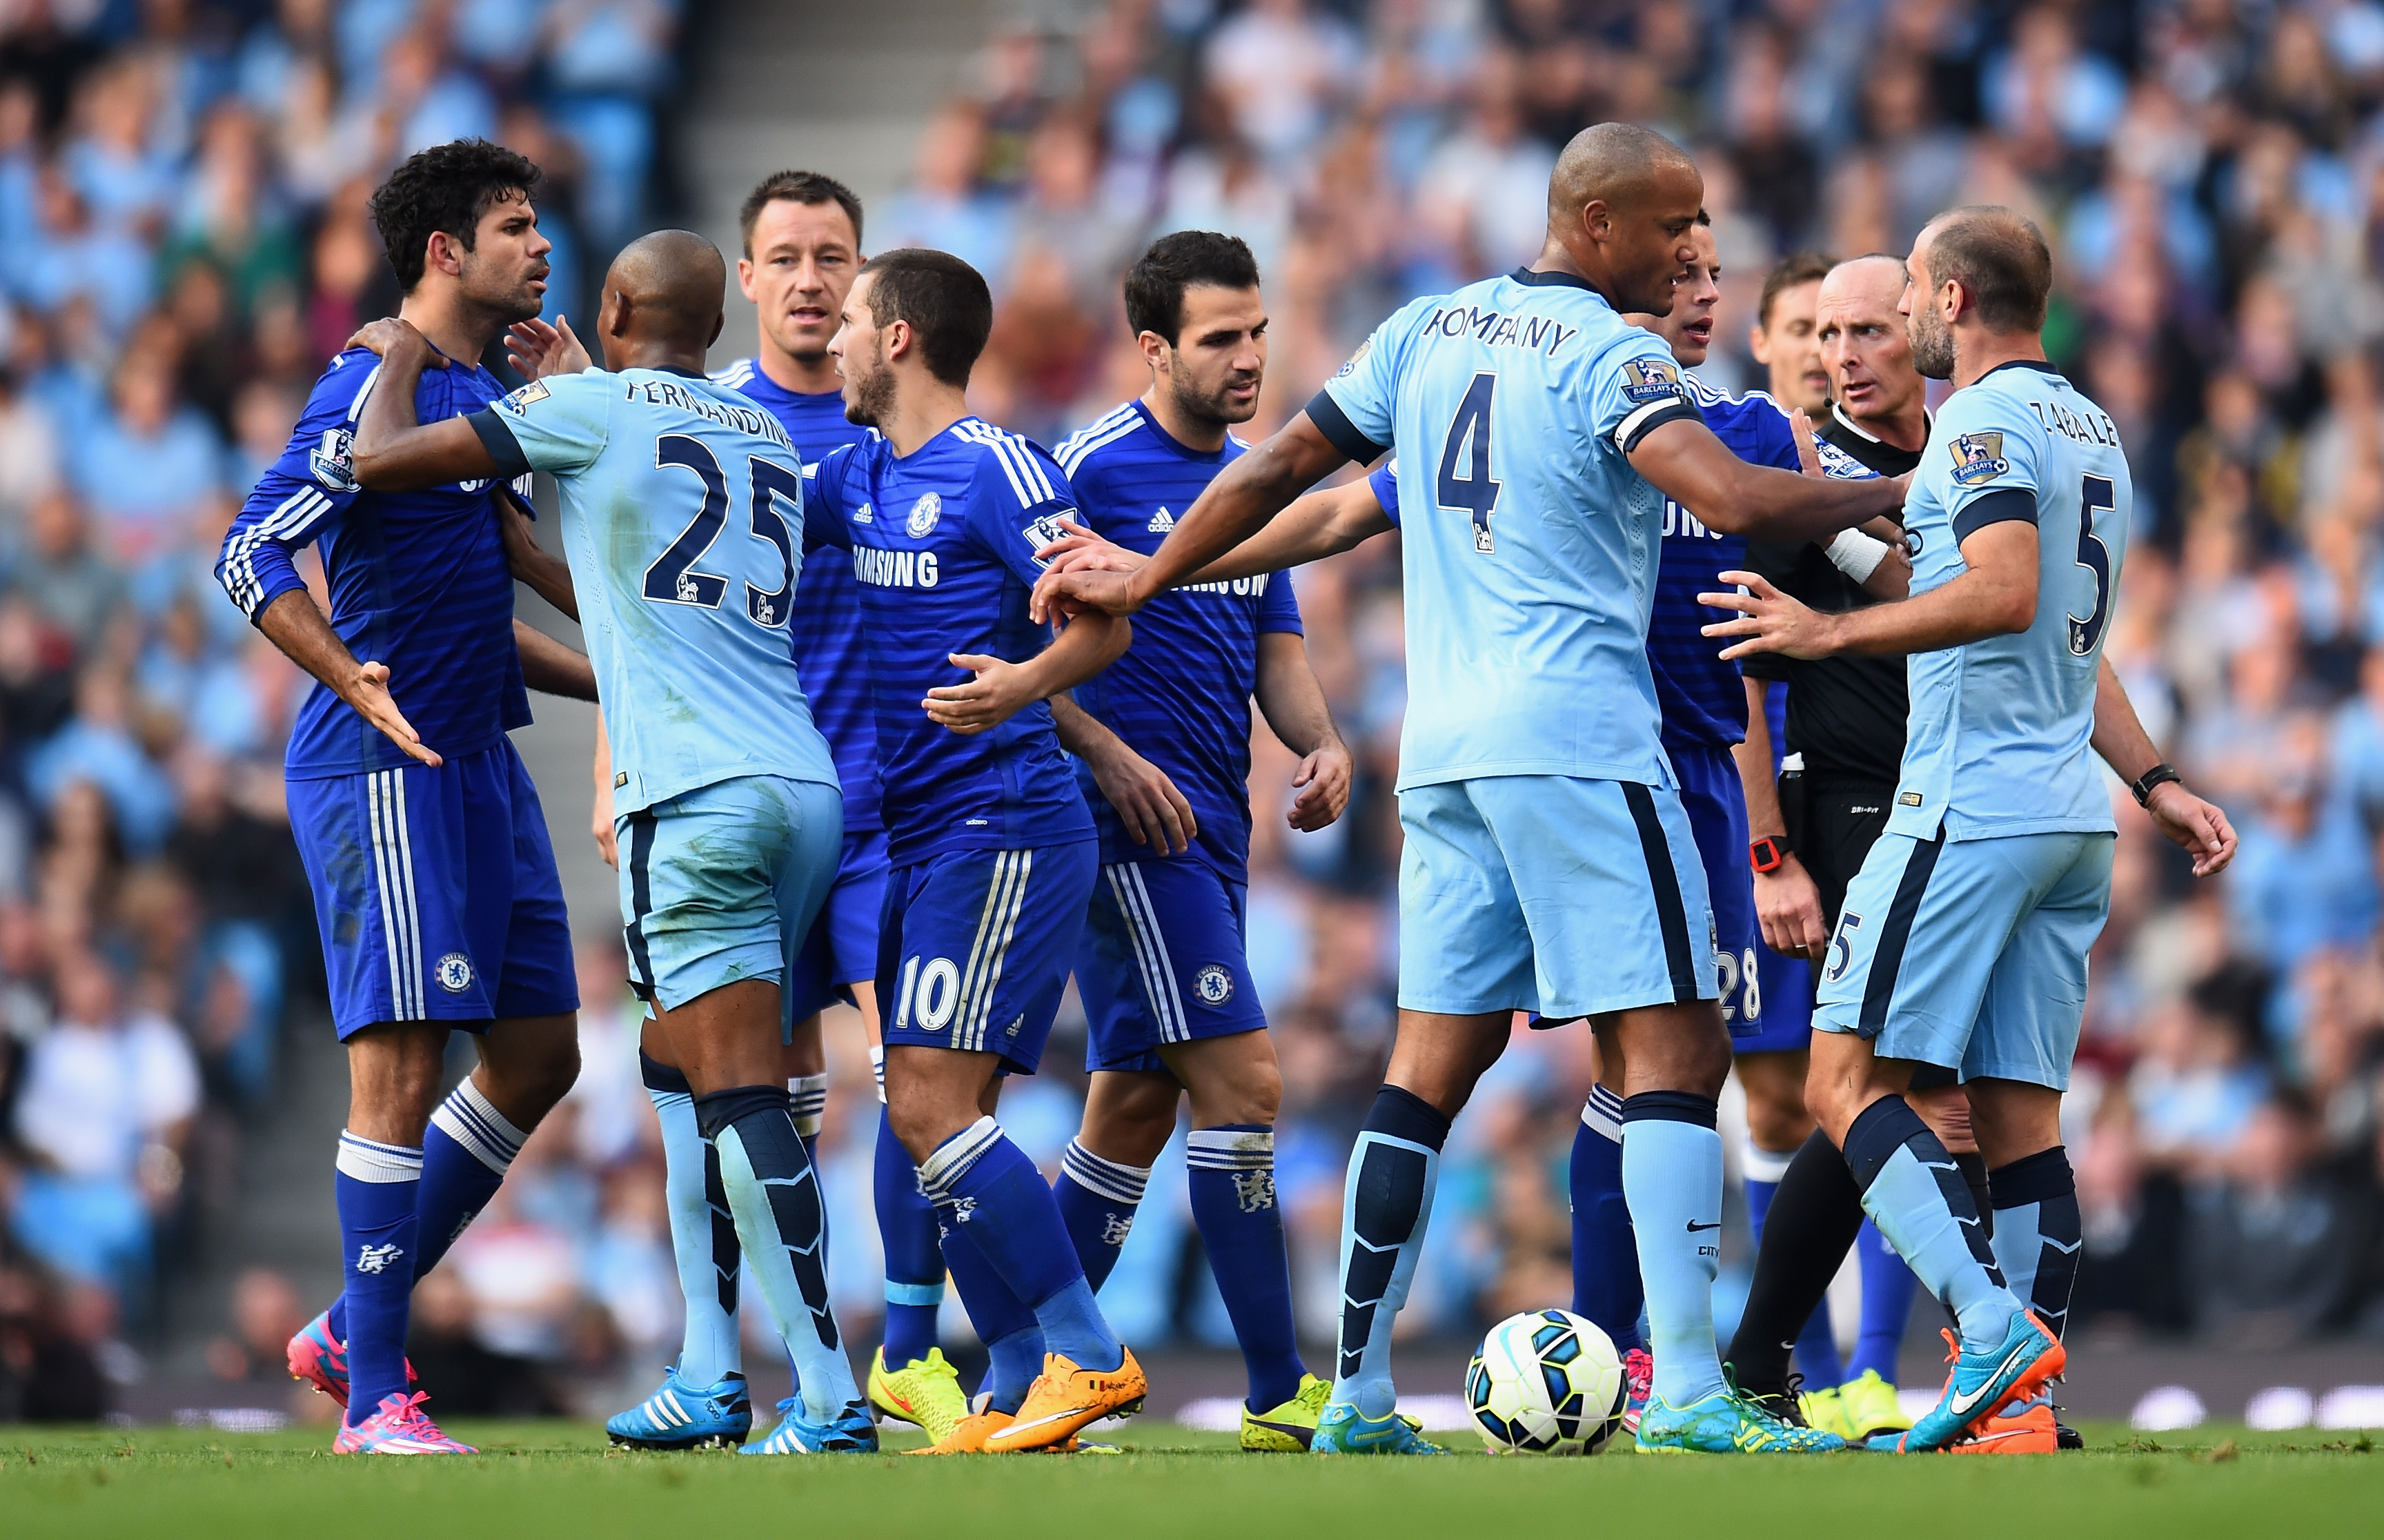 MANCHESTER, ENGLAND - SEPTEMBER 21:   Pablo Zabaleta of Manchester City is separated from Diego Costa of Chelsea by his team-mates during the Barclays Premier League match between Manchester City and Chelsea at the Etihad Stadium on September 21, 2014 in Manchester, England.  (Photo by Shaun Botterill/Getty Images)